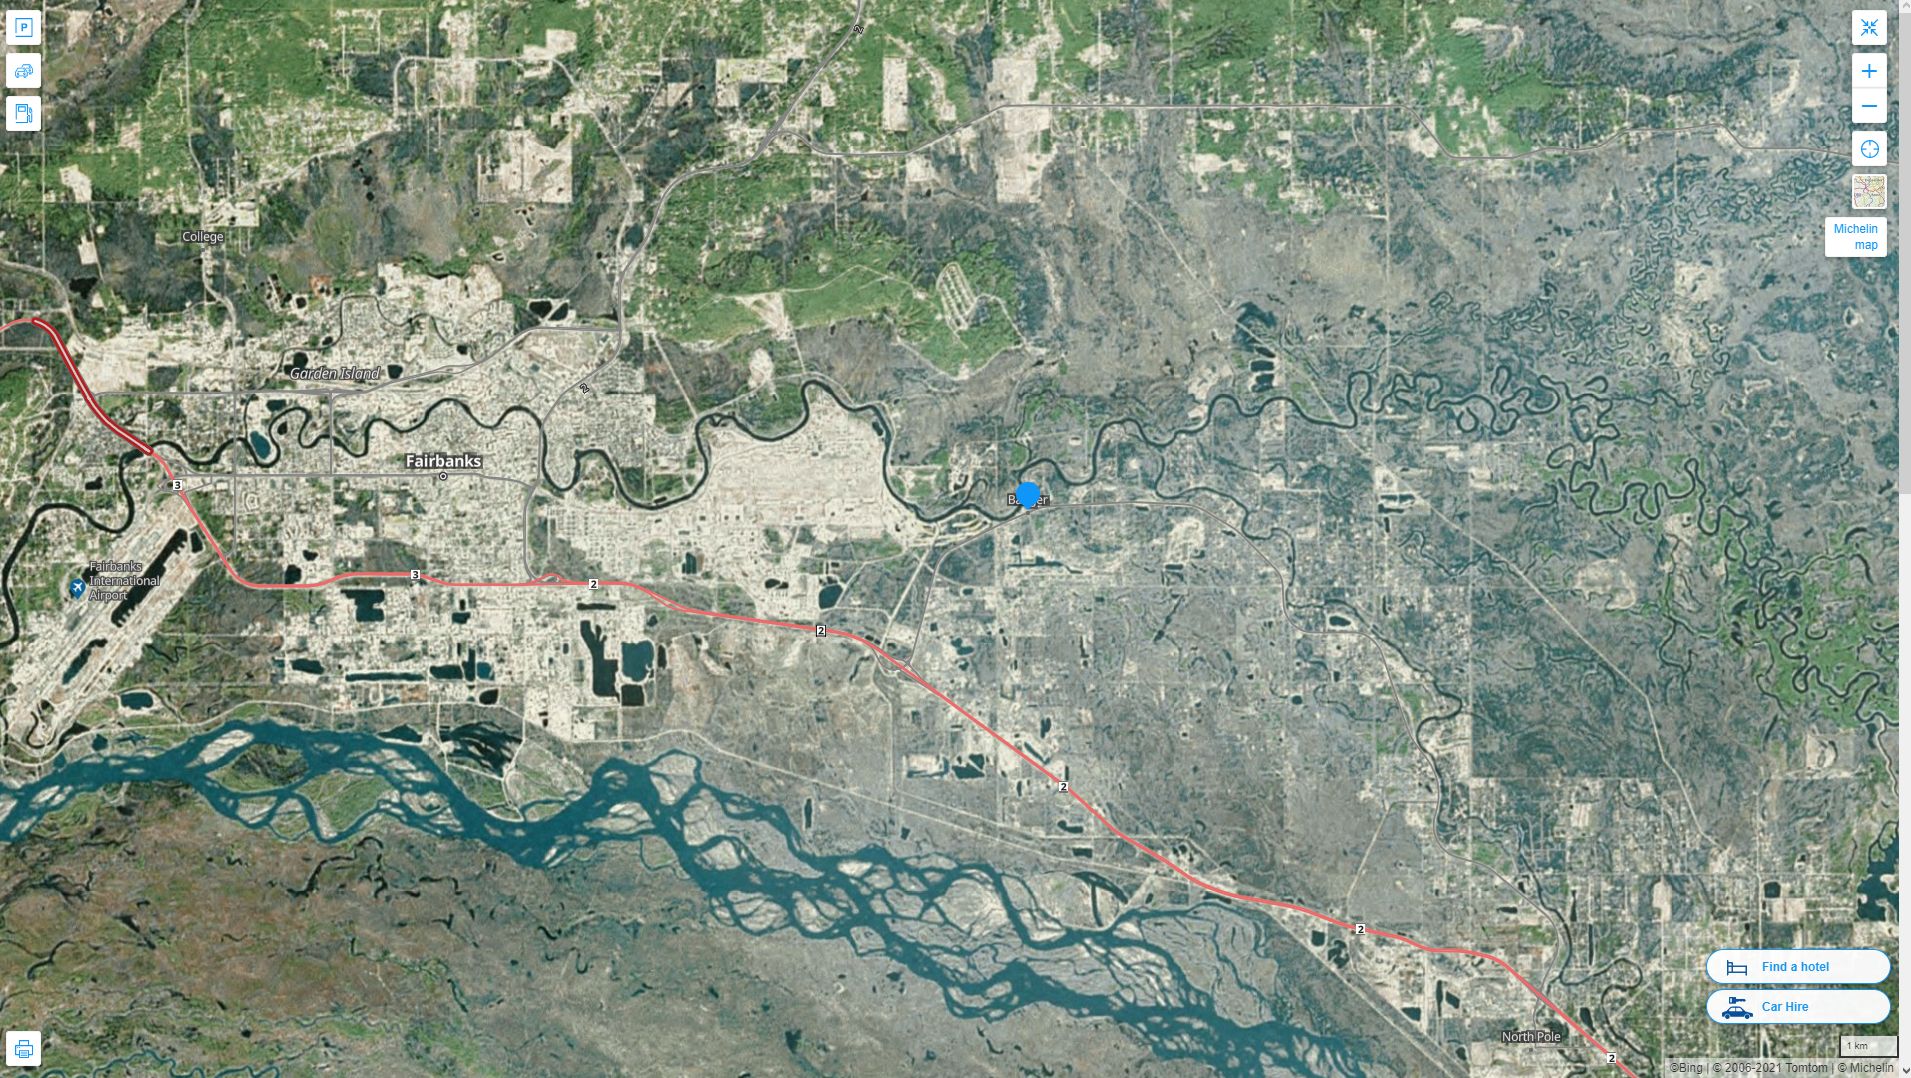 Badger Alaska Highway and Road Map with Satellite View